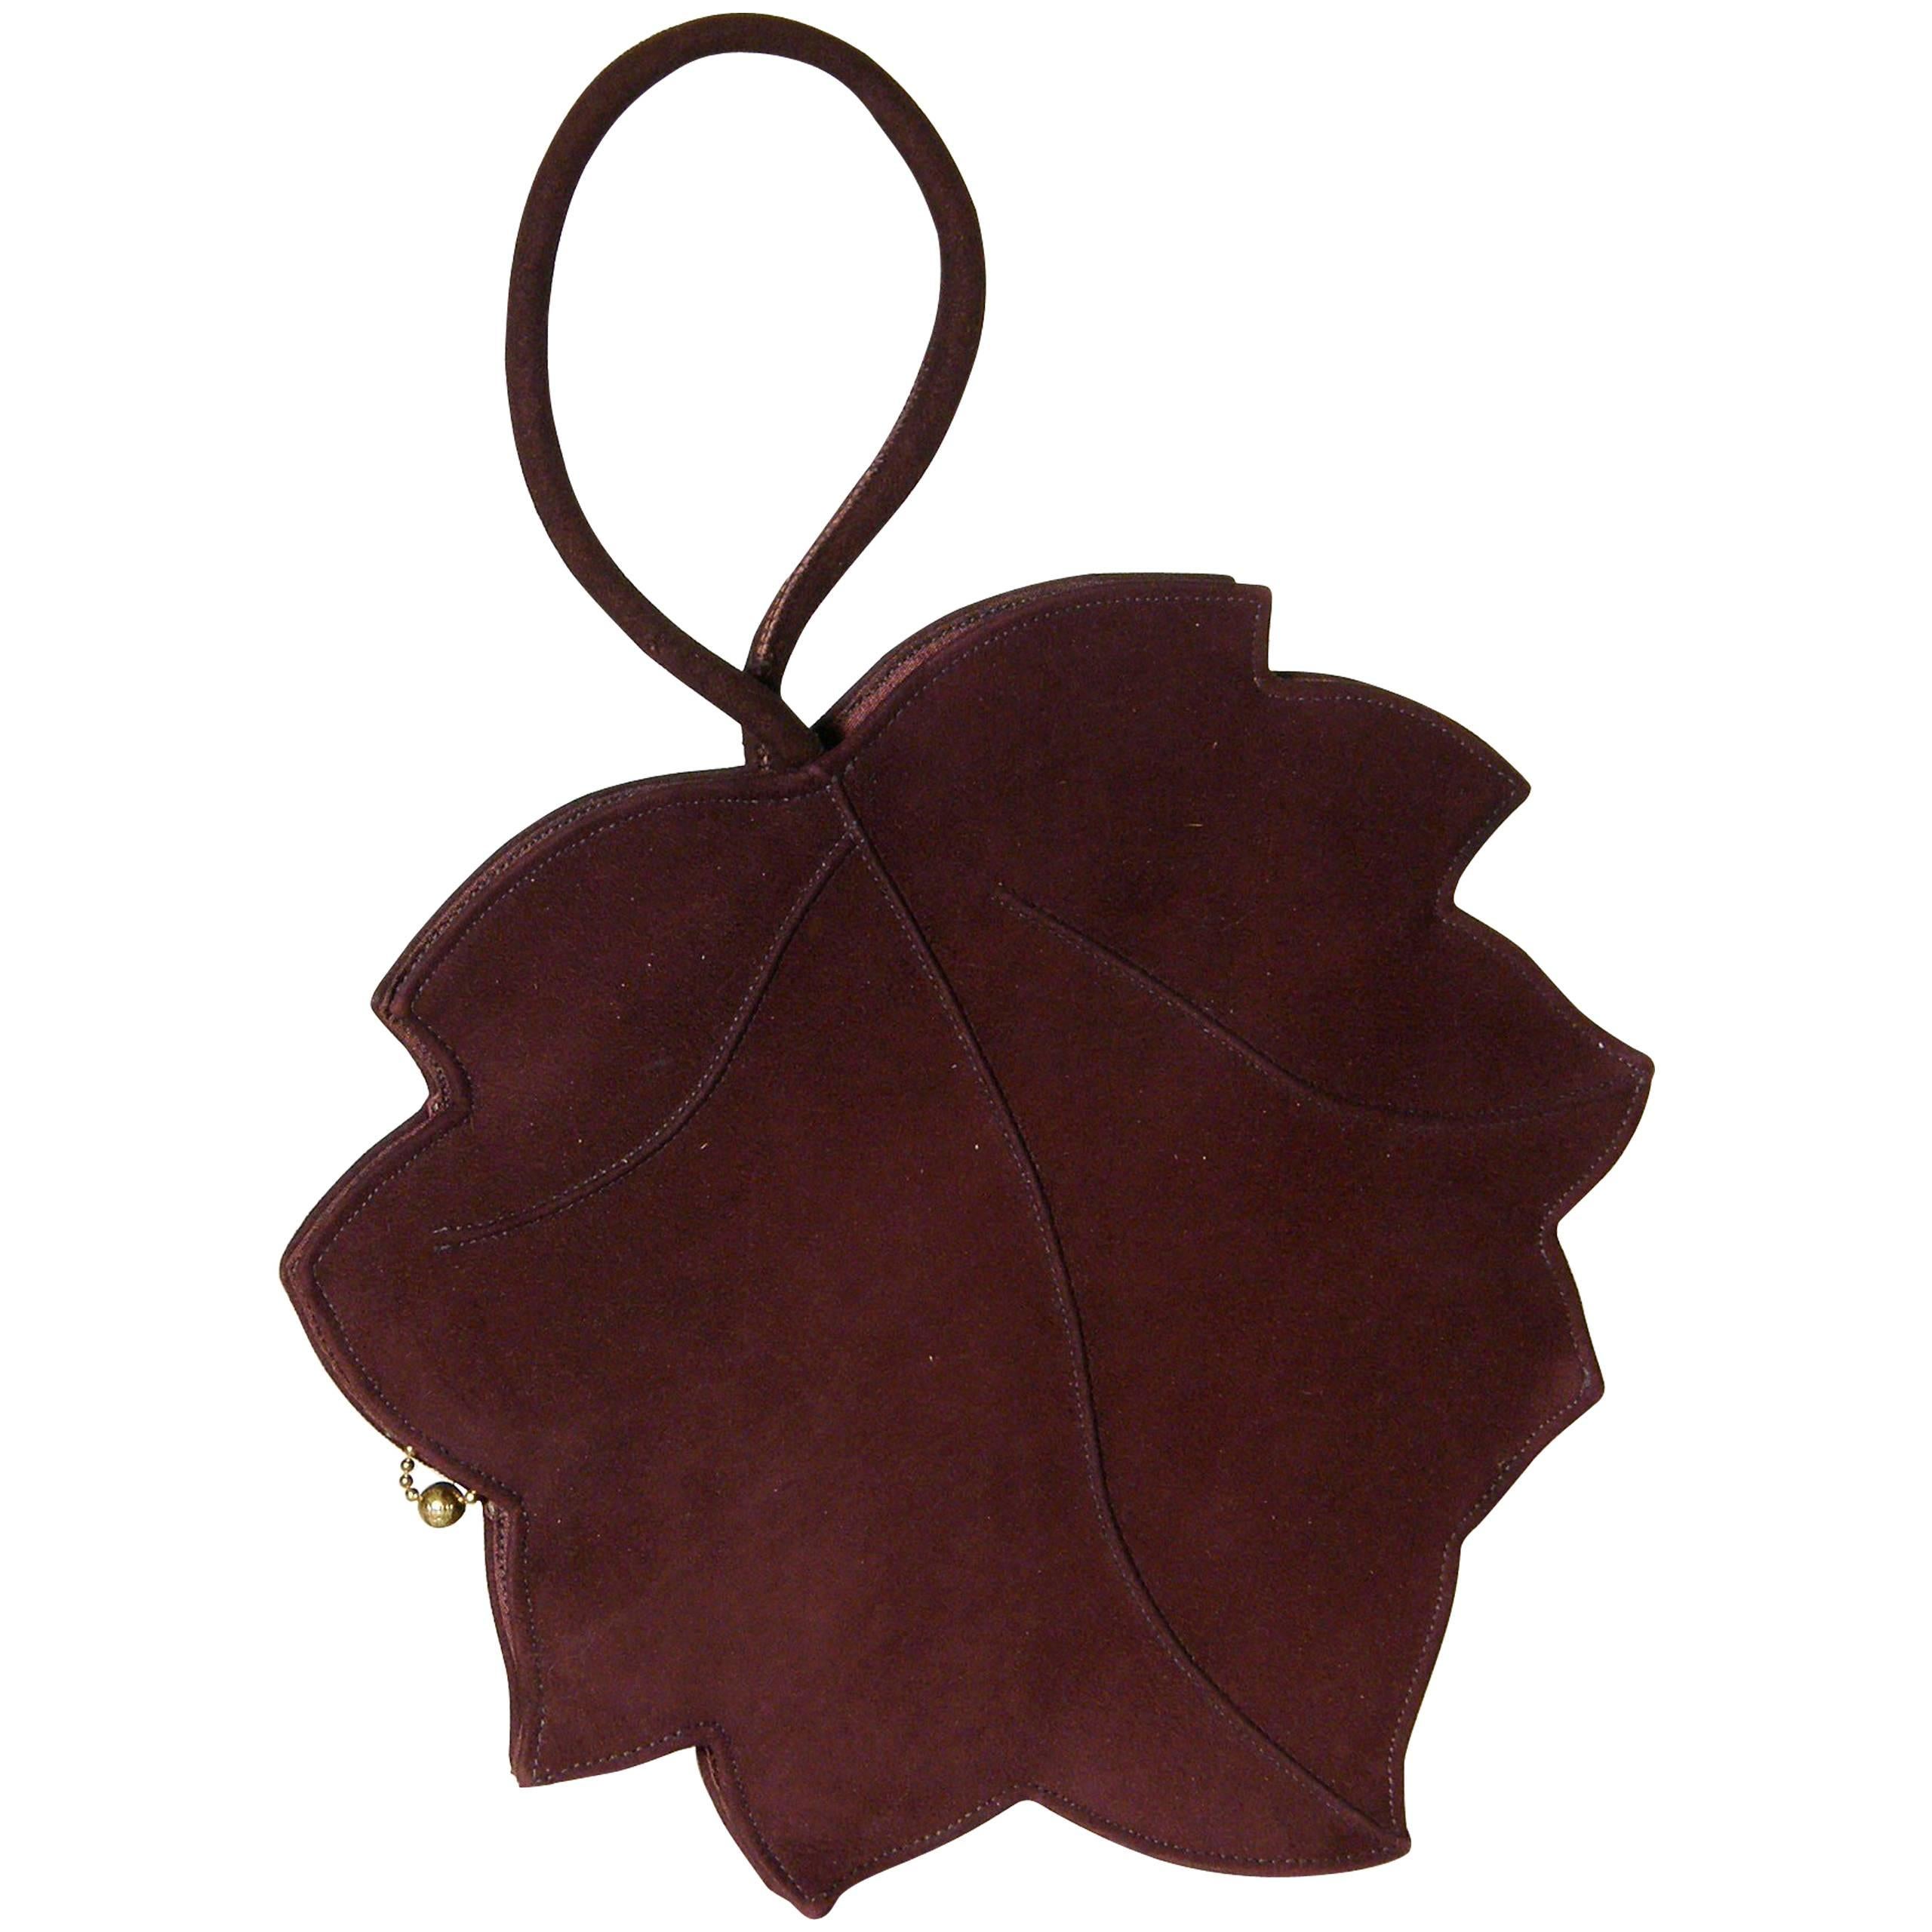 Curvaceous Falling Leaf Shaped Handbag in Aubergine Colored Suede